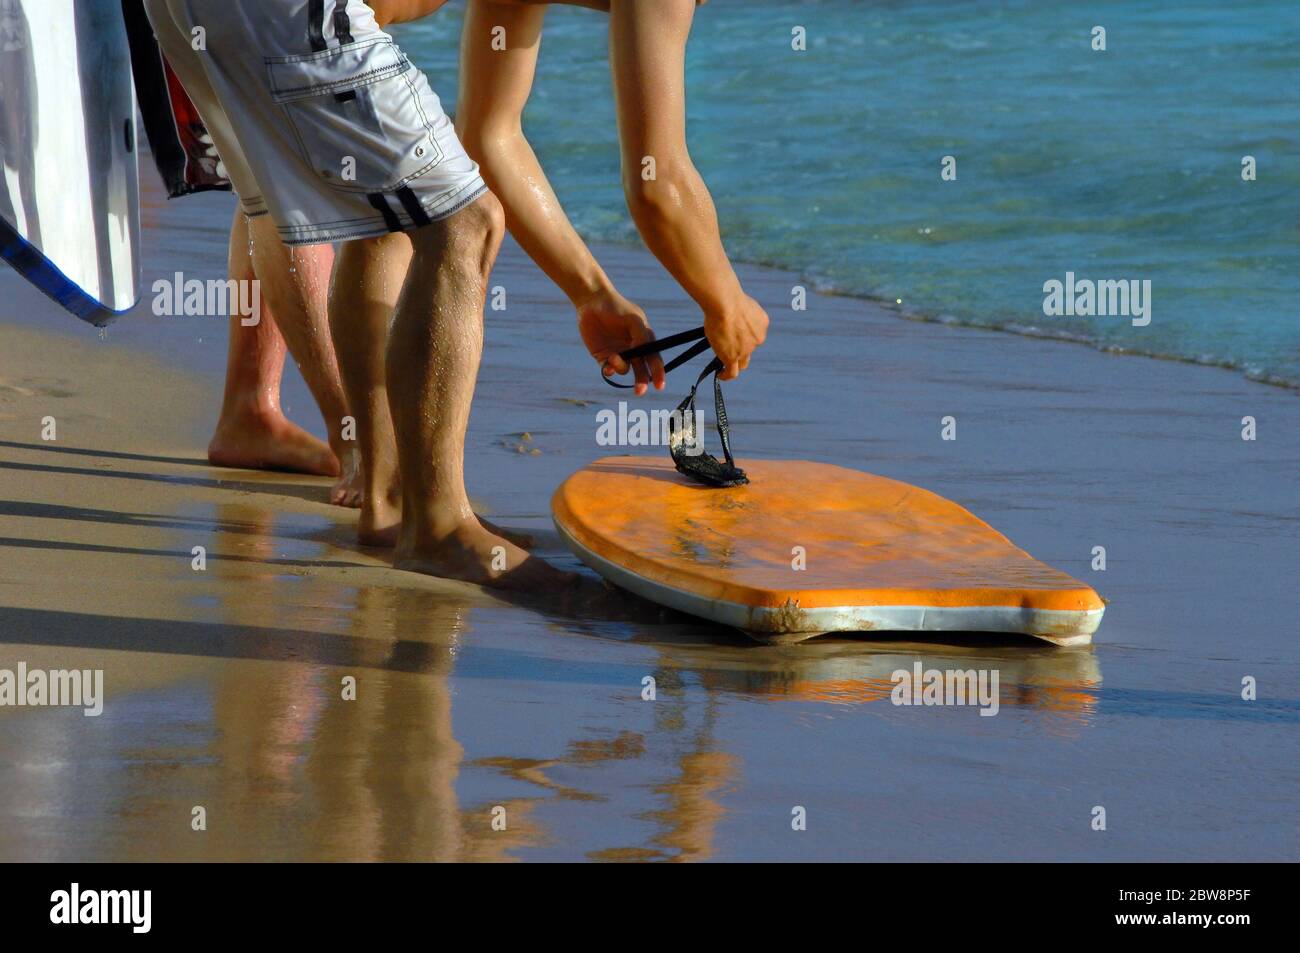 Boogie Boarder prepares to ride the waves.  He and buddies share the use of the orange boogie board. Stock Photo